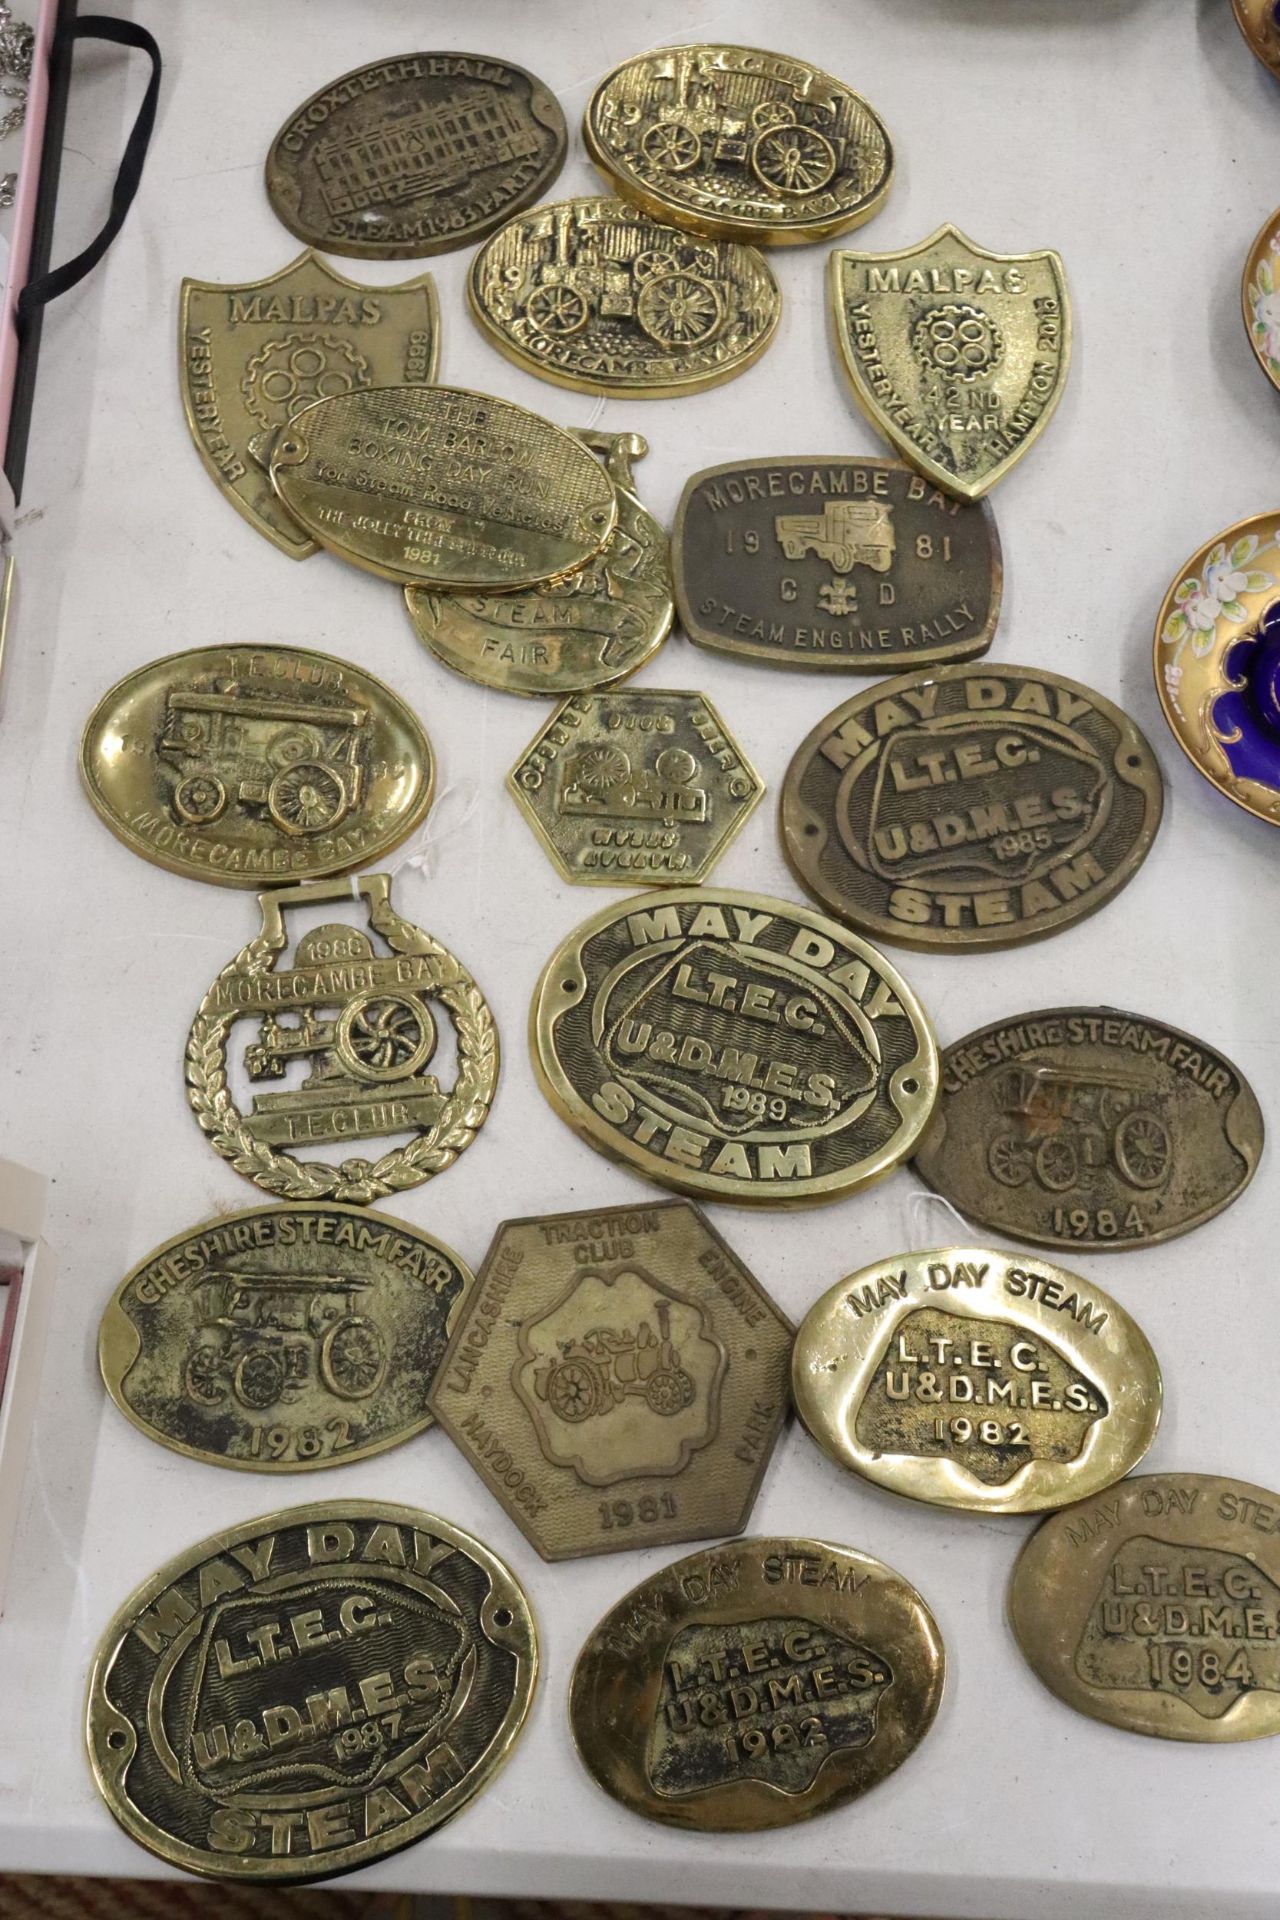 A LARGE COLLECTION OF BRASS STEAM RALLY PLAQUES - 20 IN TOTAL